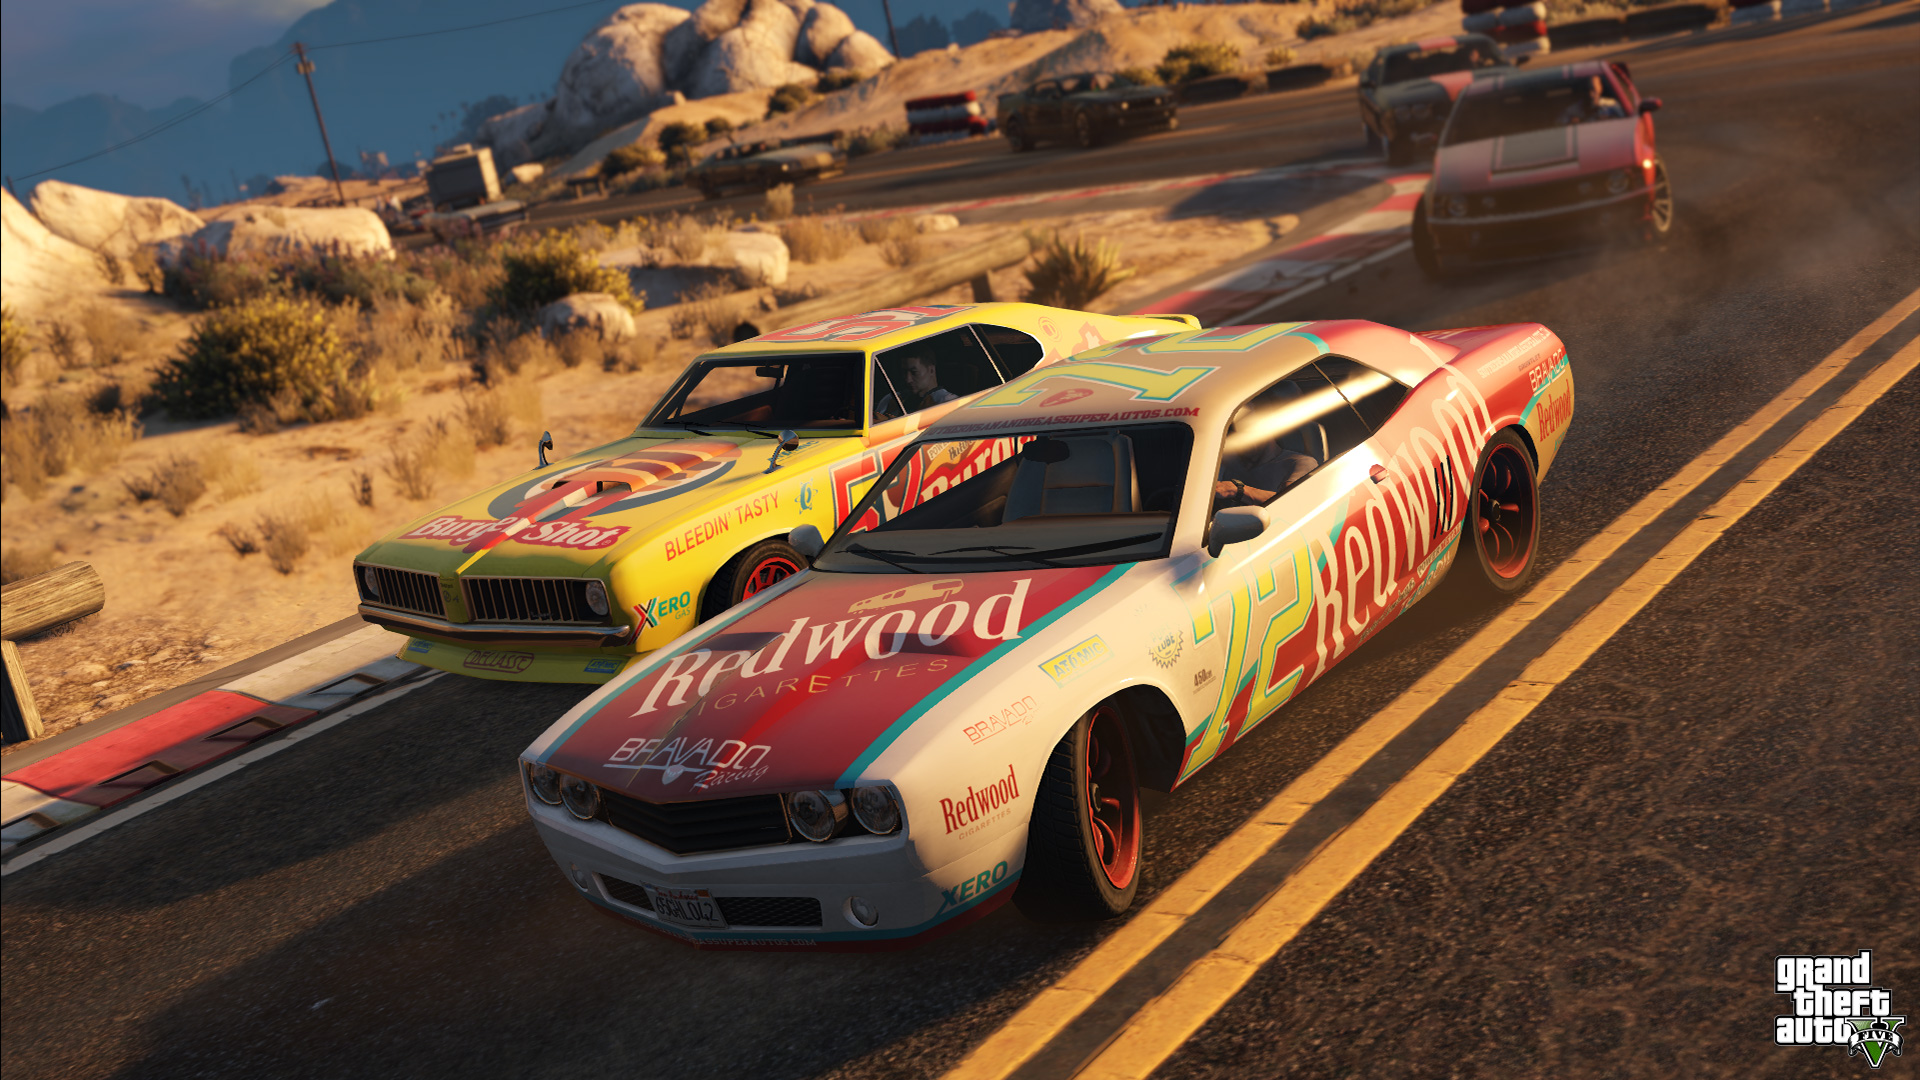 Stock Car Races to earn new Muscle Cars.